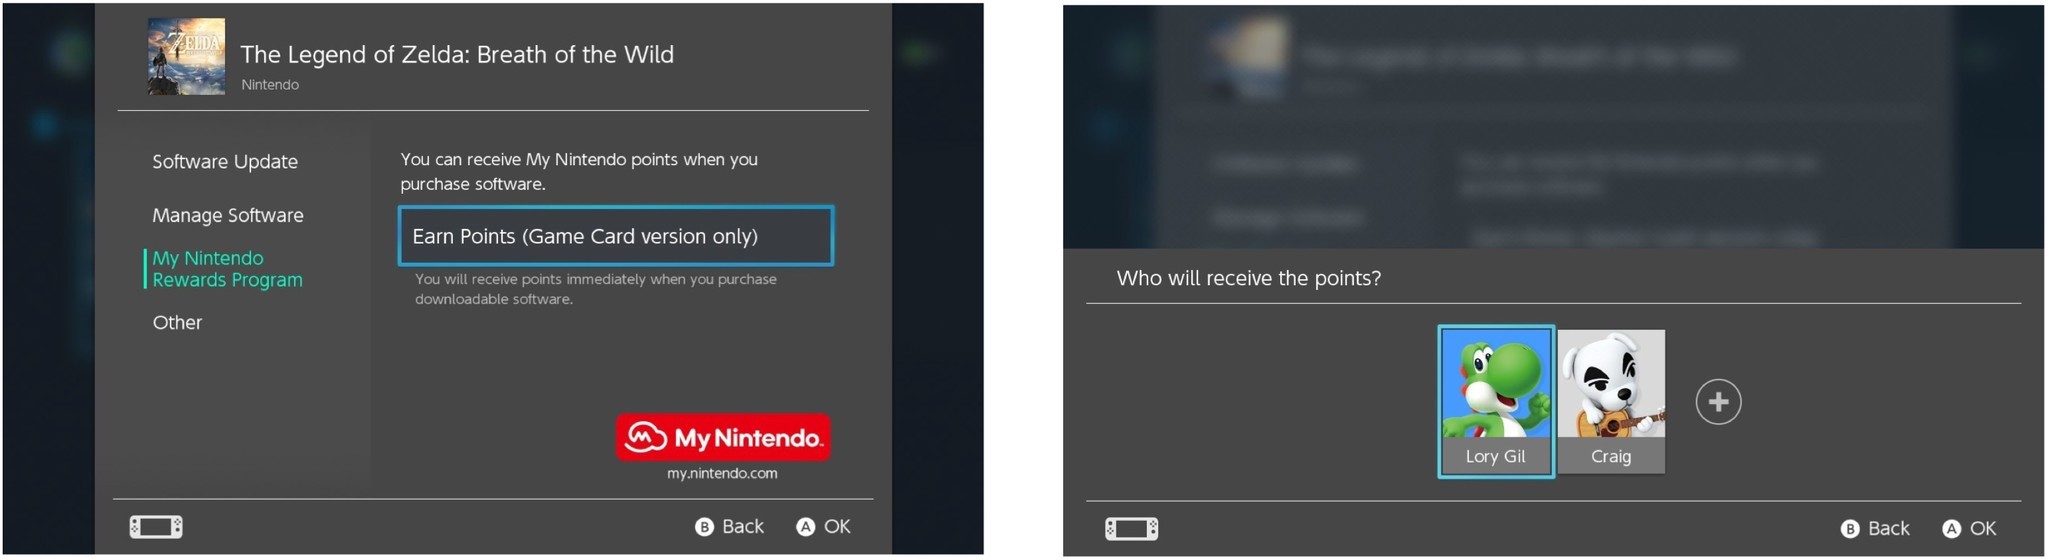 Selecting a profile for Gold points on the Nintendo Switch